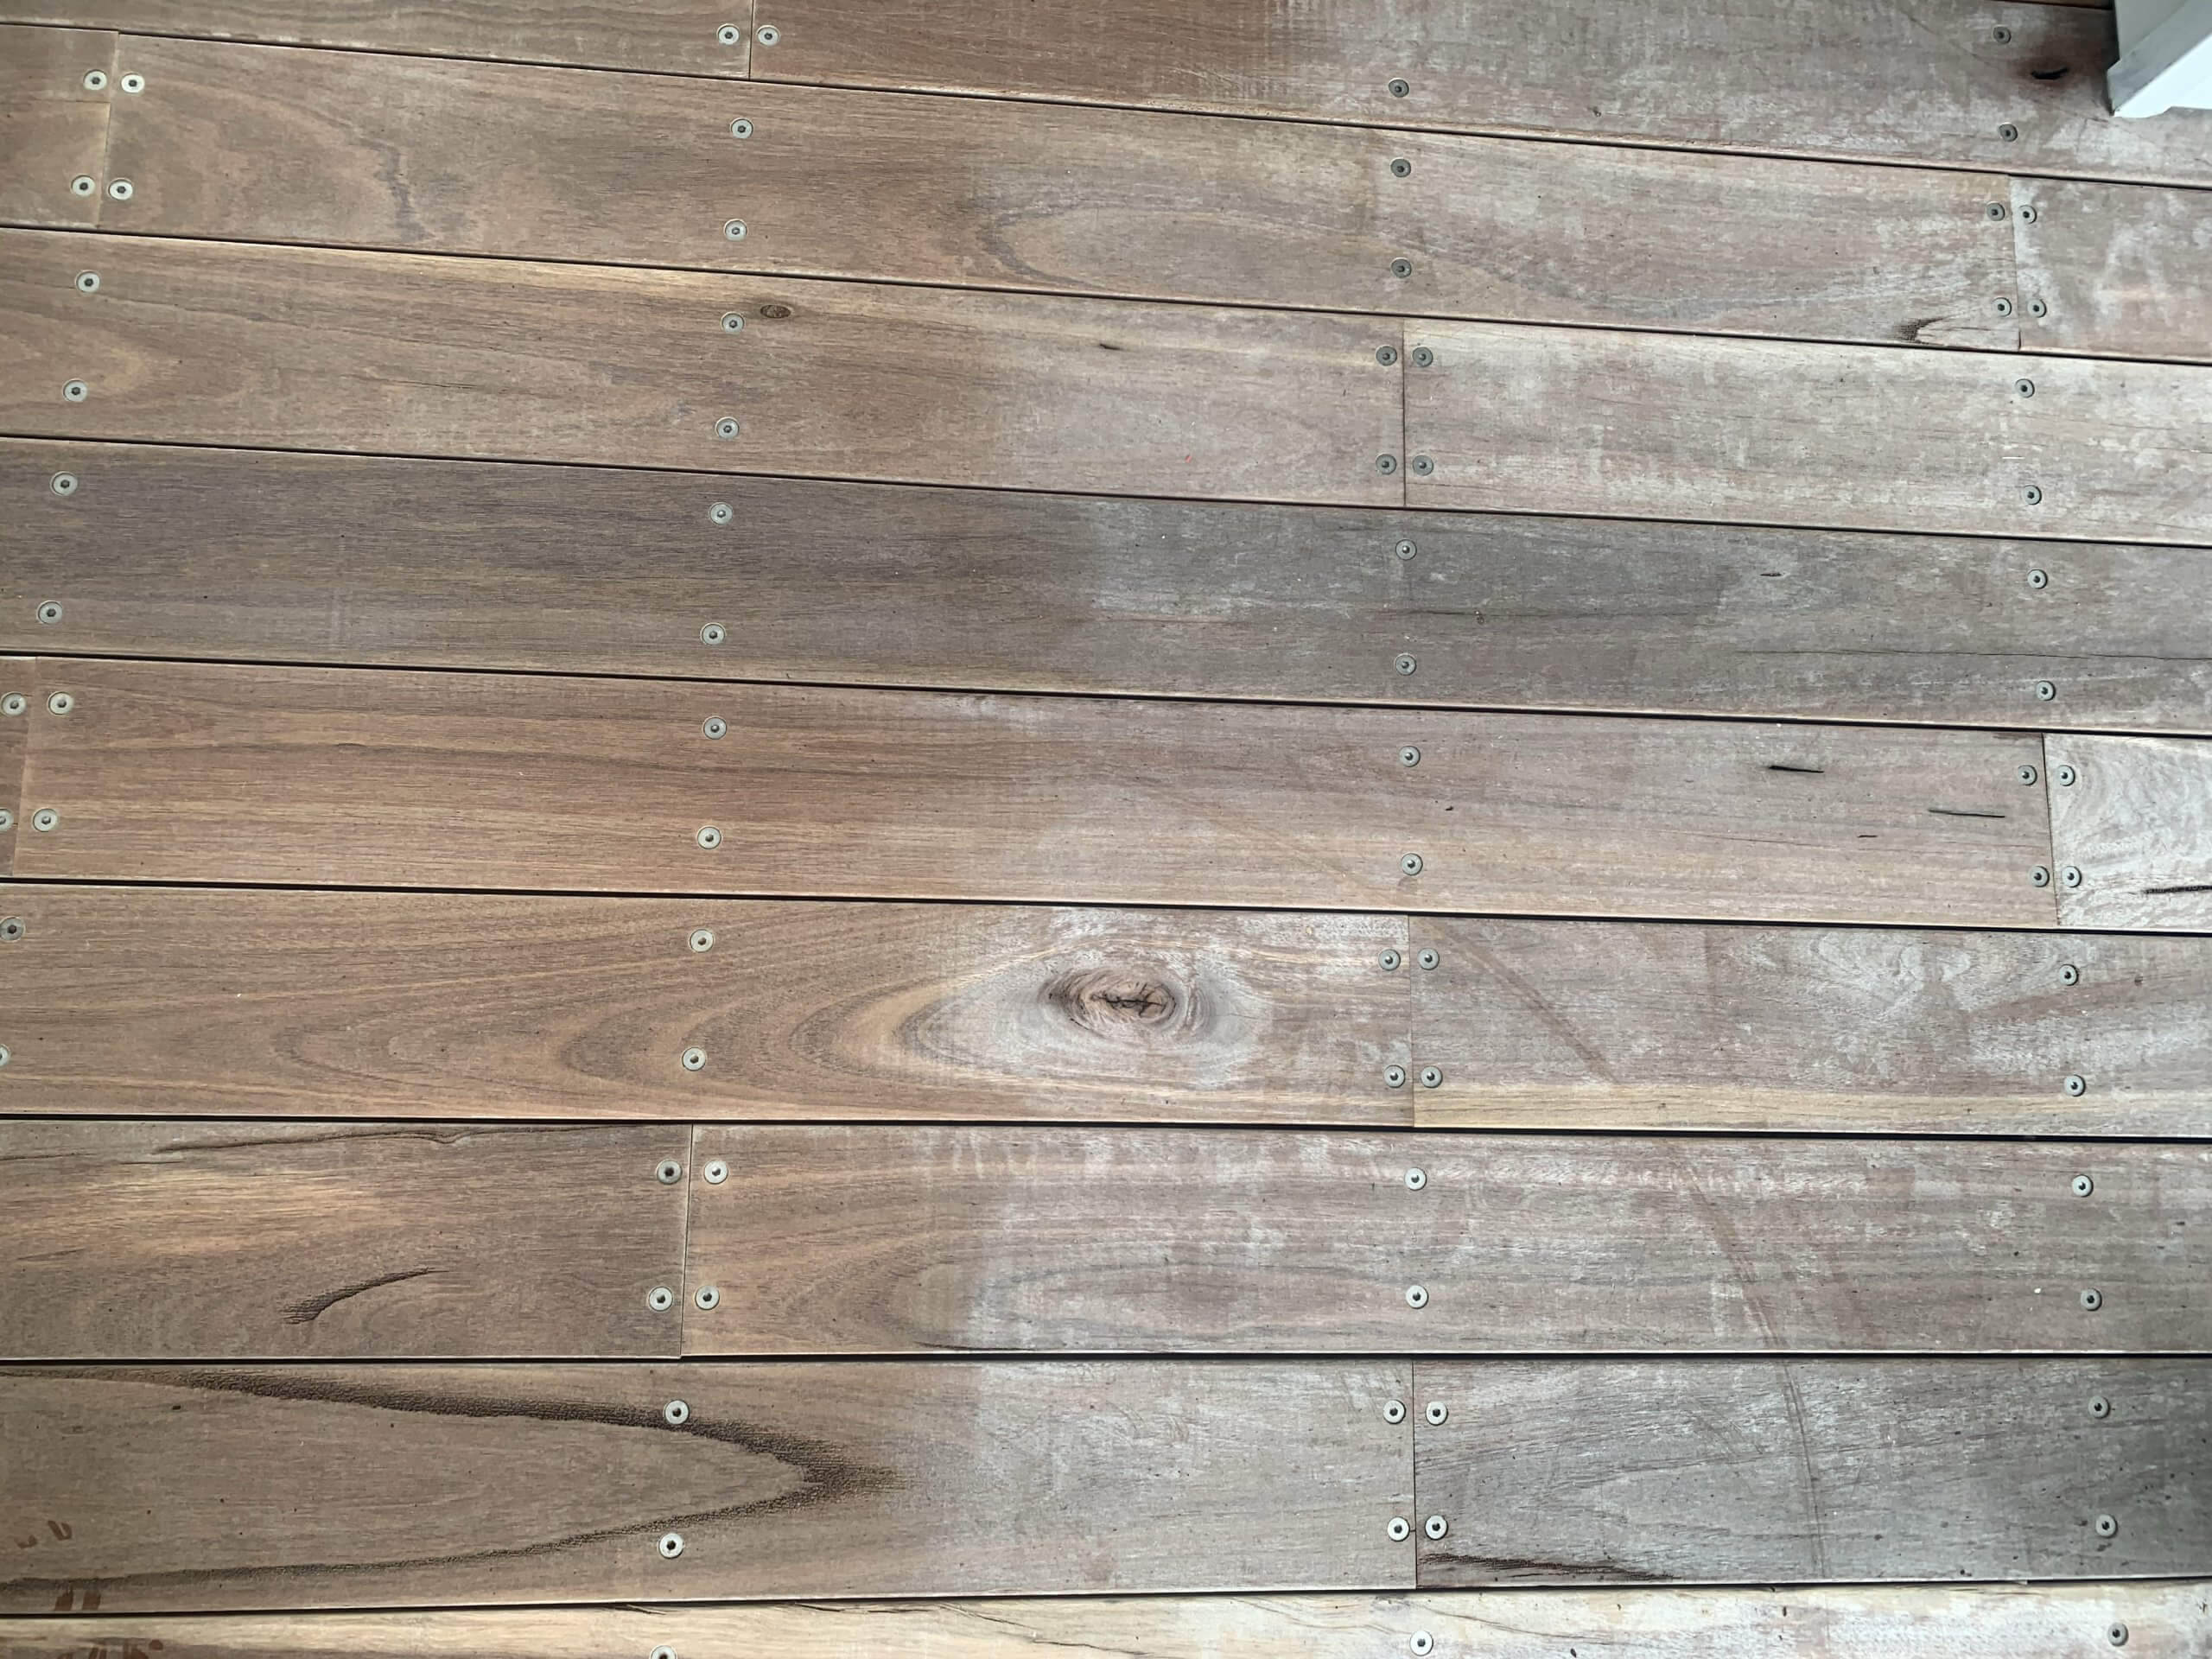 Deck fuzzy after power washing